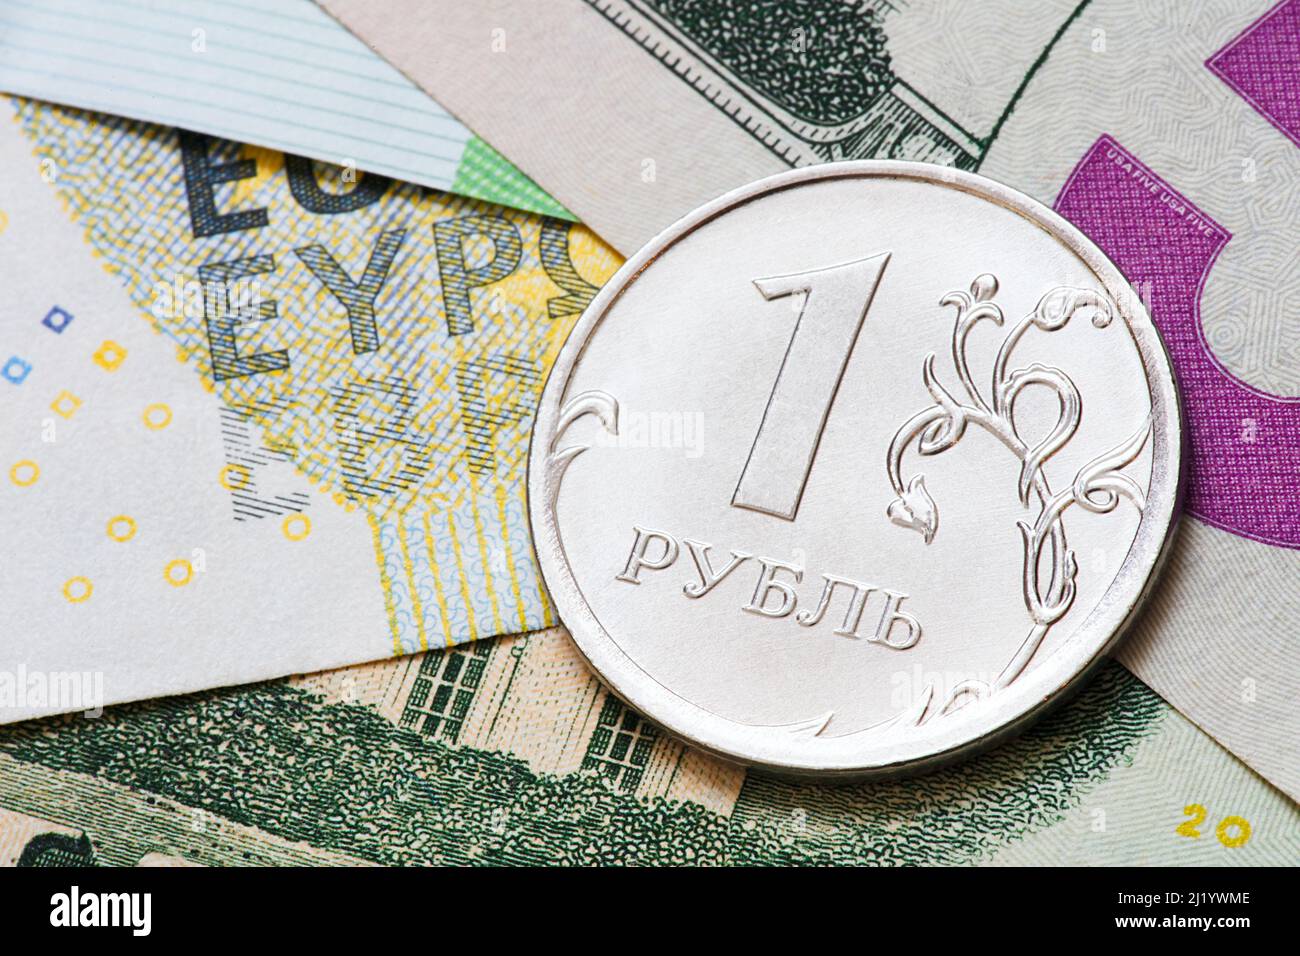 One ruble against the background of euro and dollar banknotes Stock Photo